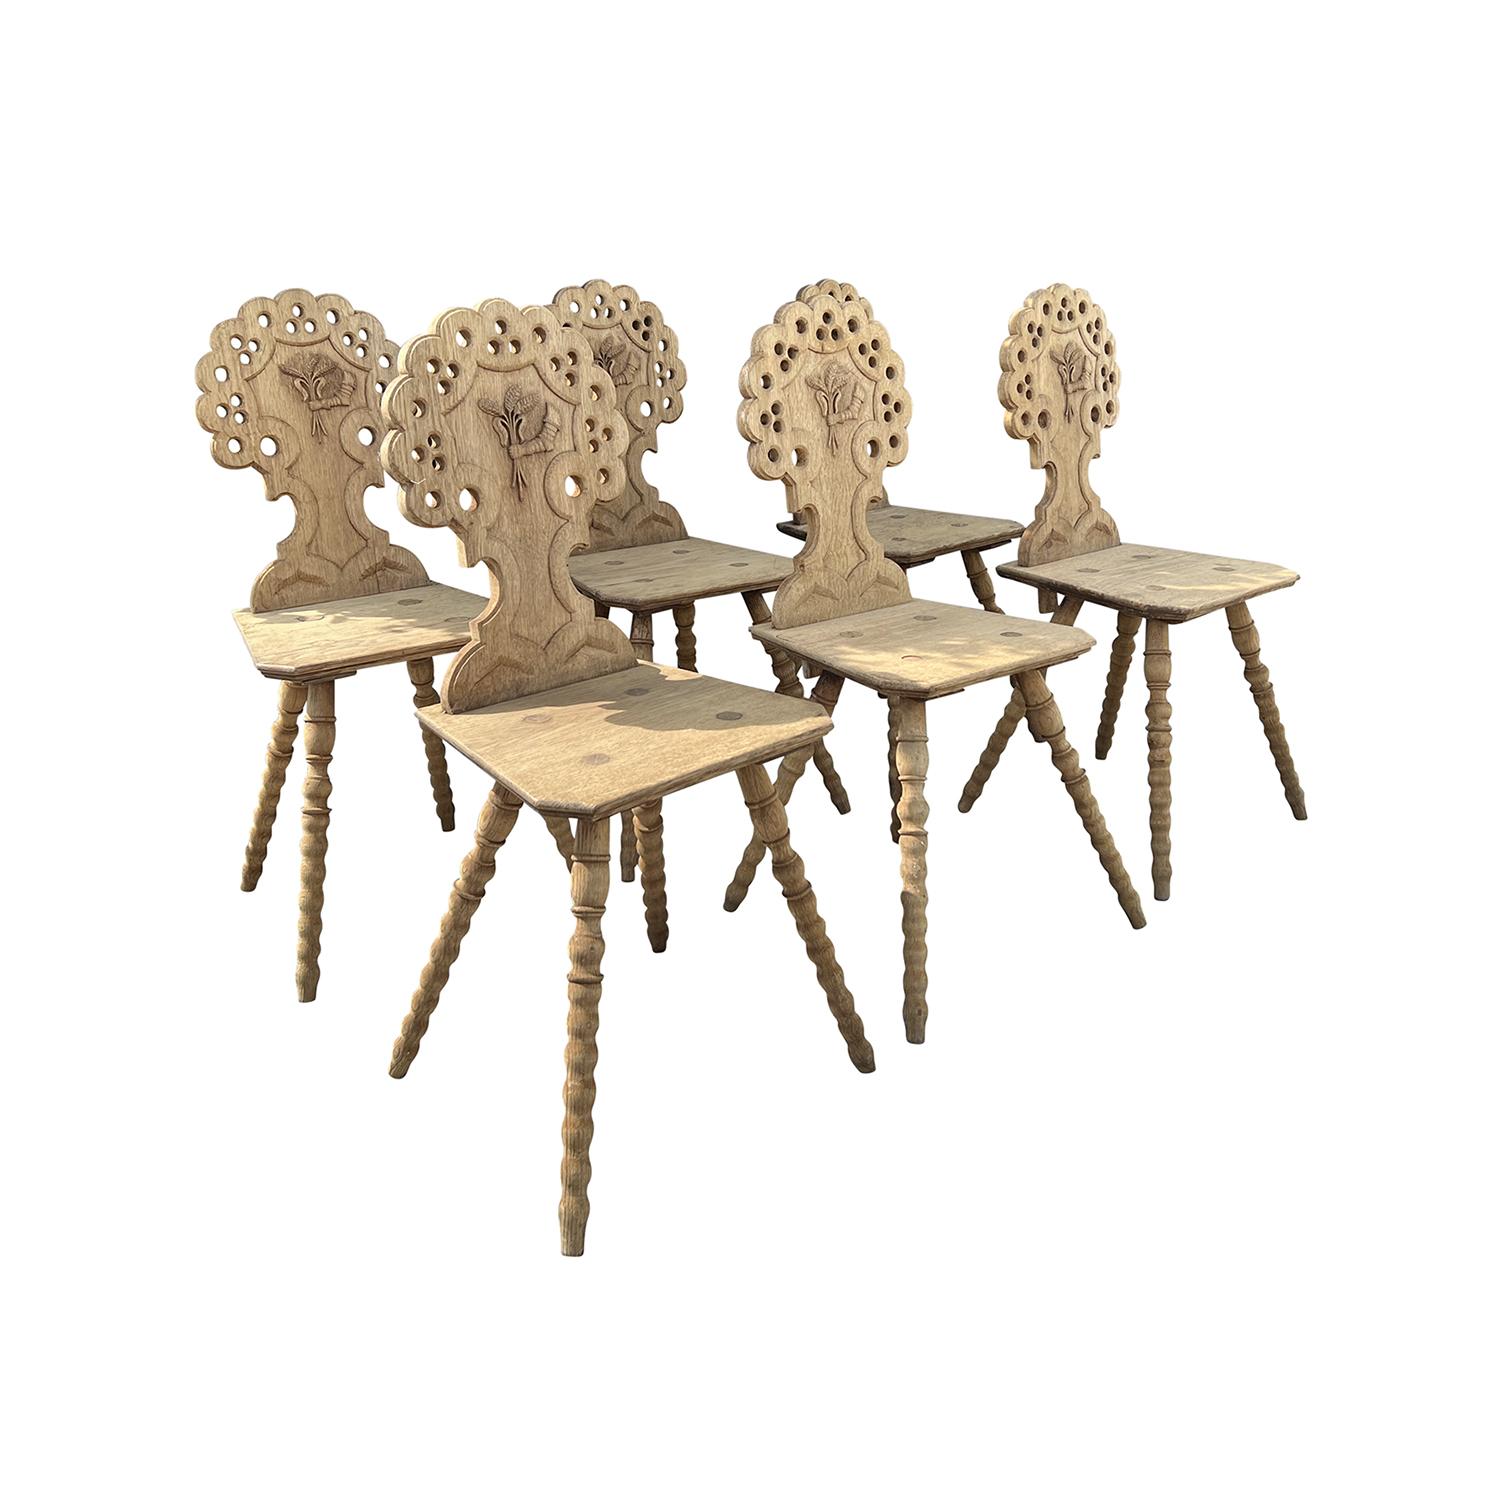 A set of six antique Italian dining room chairs made of hand crafted solid Pinewood. The backrest are carved with cut-outs and the legs are turned. In original condition with visible wear and heavy patina. Wear consistent with age and use, overall